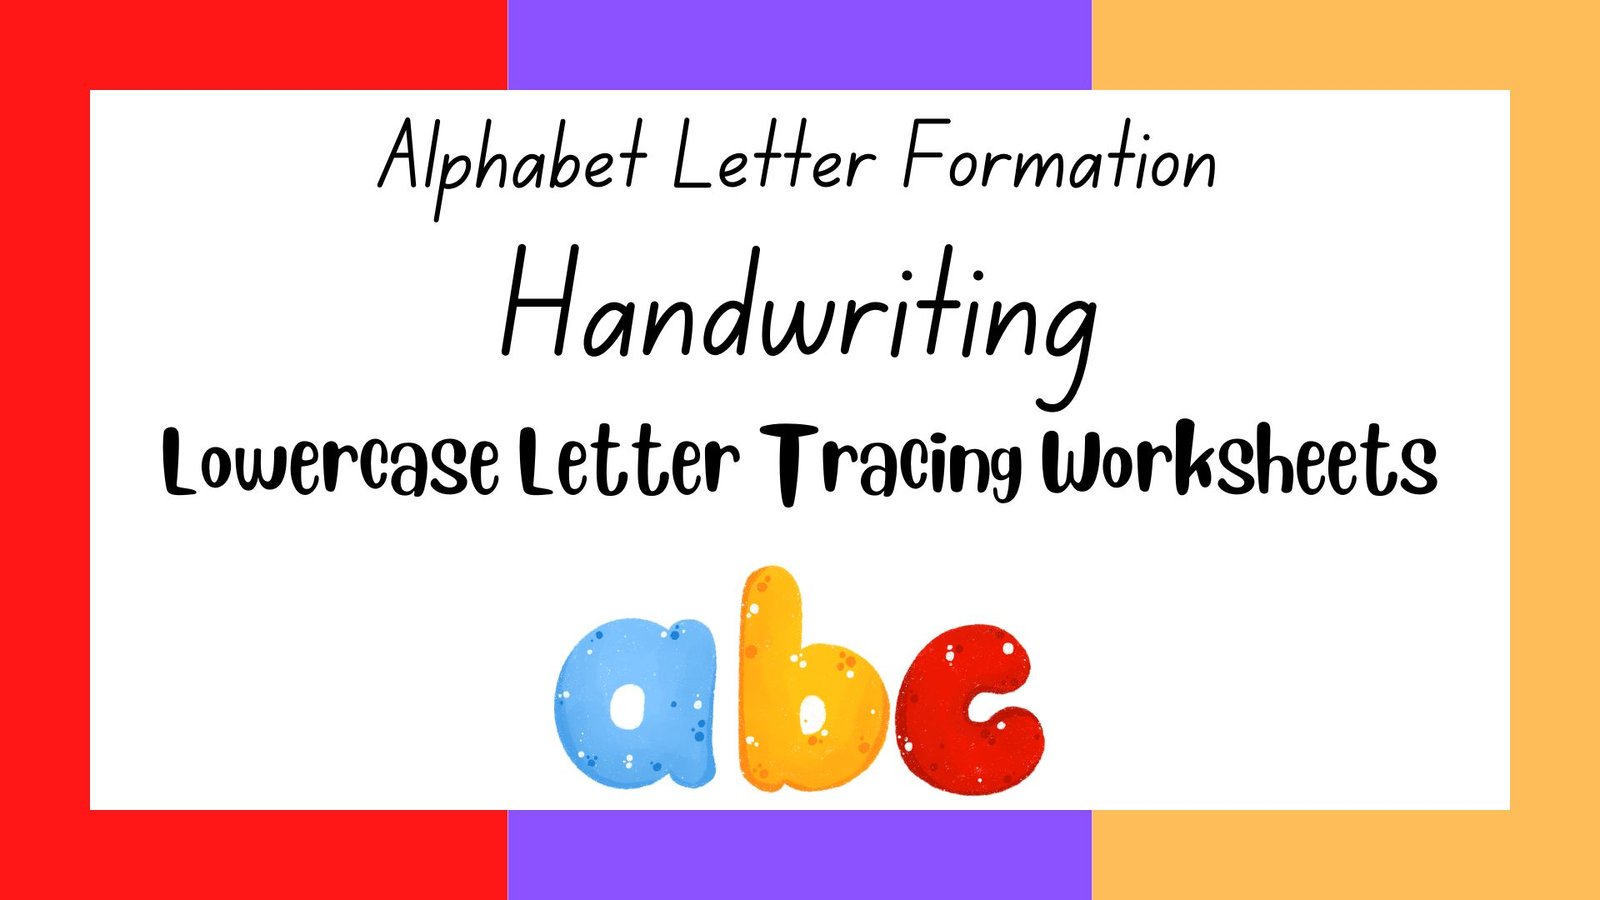 Lowercase Letter Tracing Worksheets: Free Printable for Kids (26 Pages)